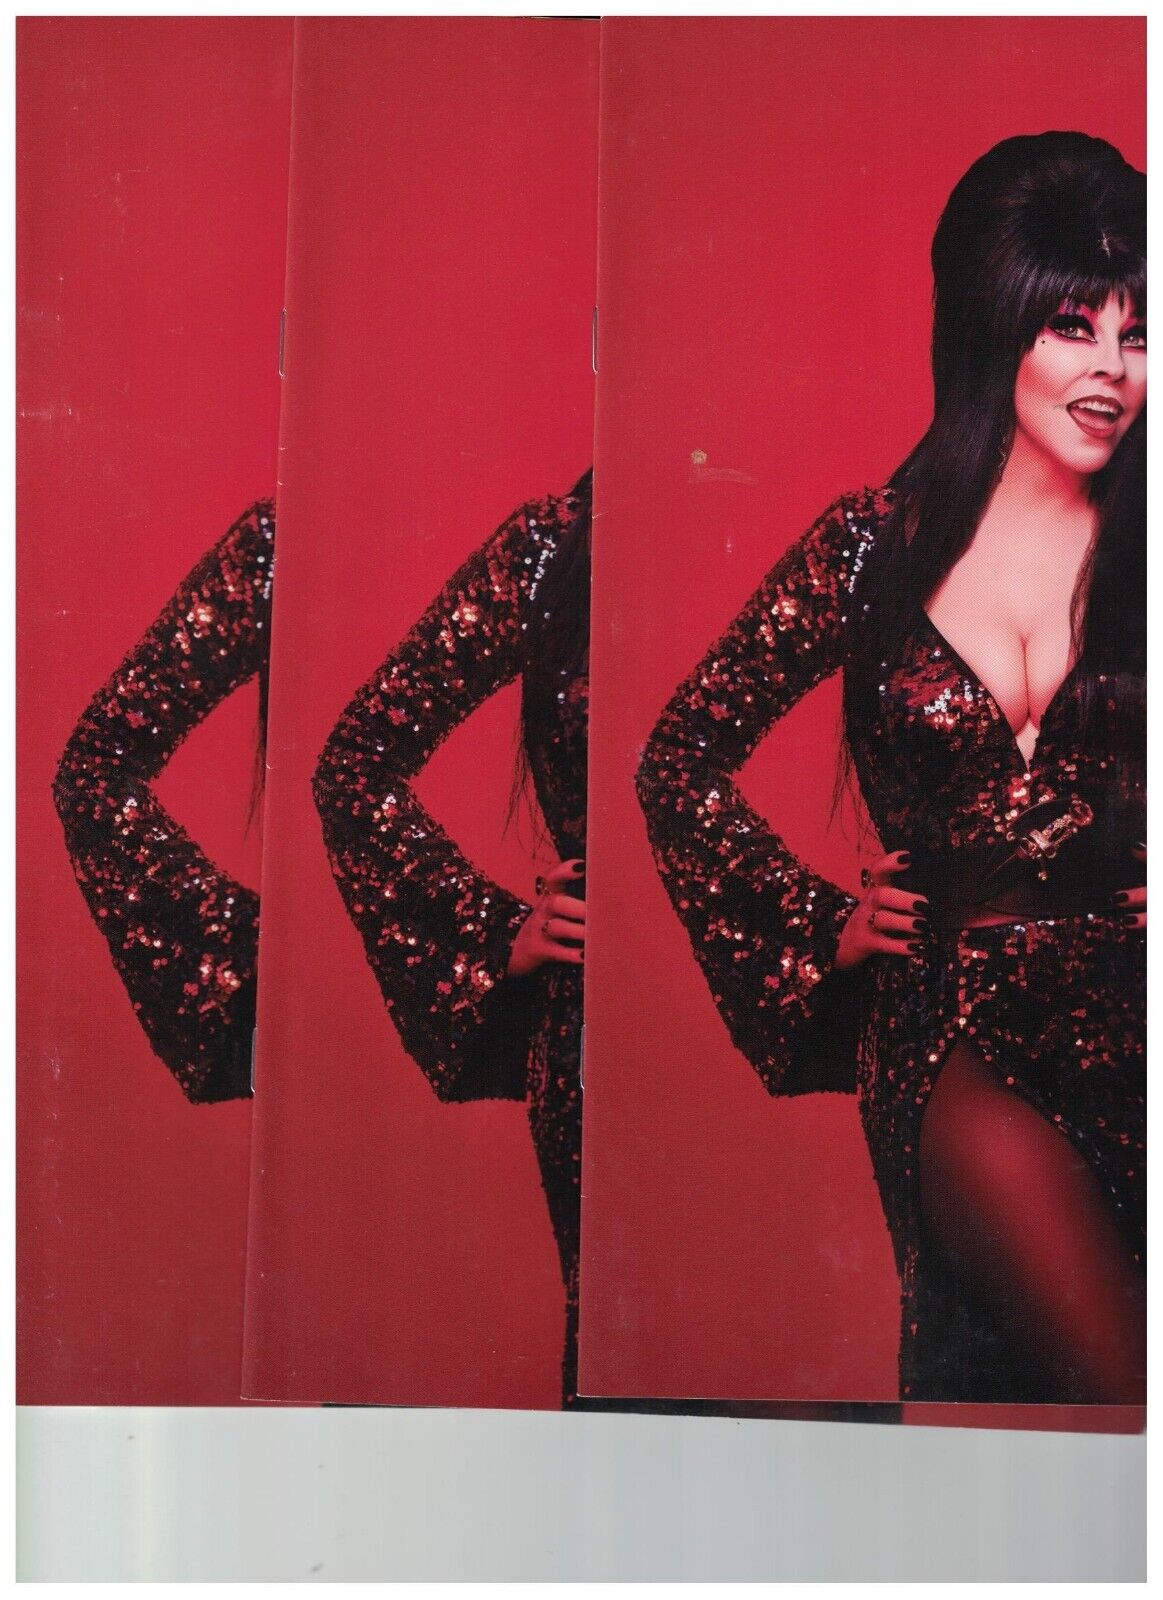 ELVIRA MEETS VINCENT PRICE #2I VIRGIN PHOTO VARIANT BY DYNAMITE 2021  SCUFFED